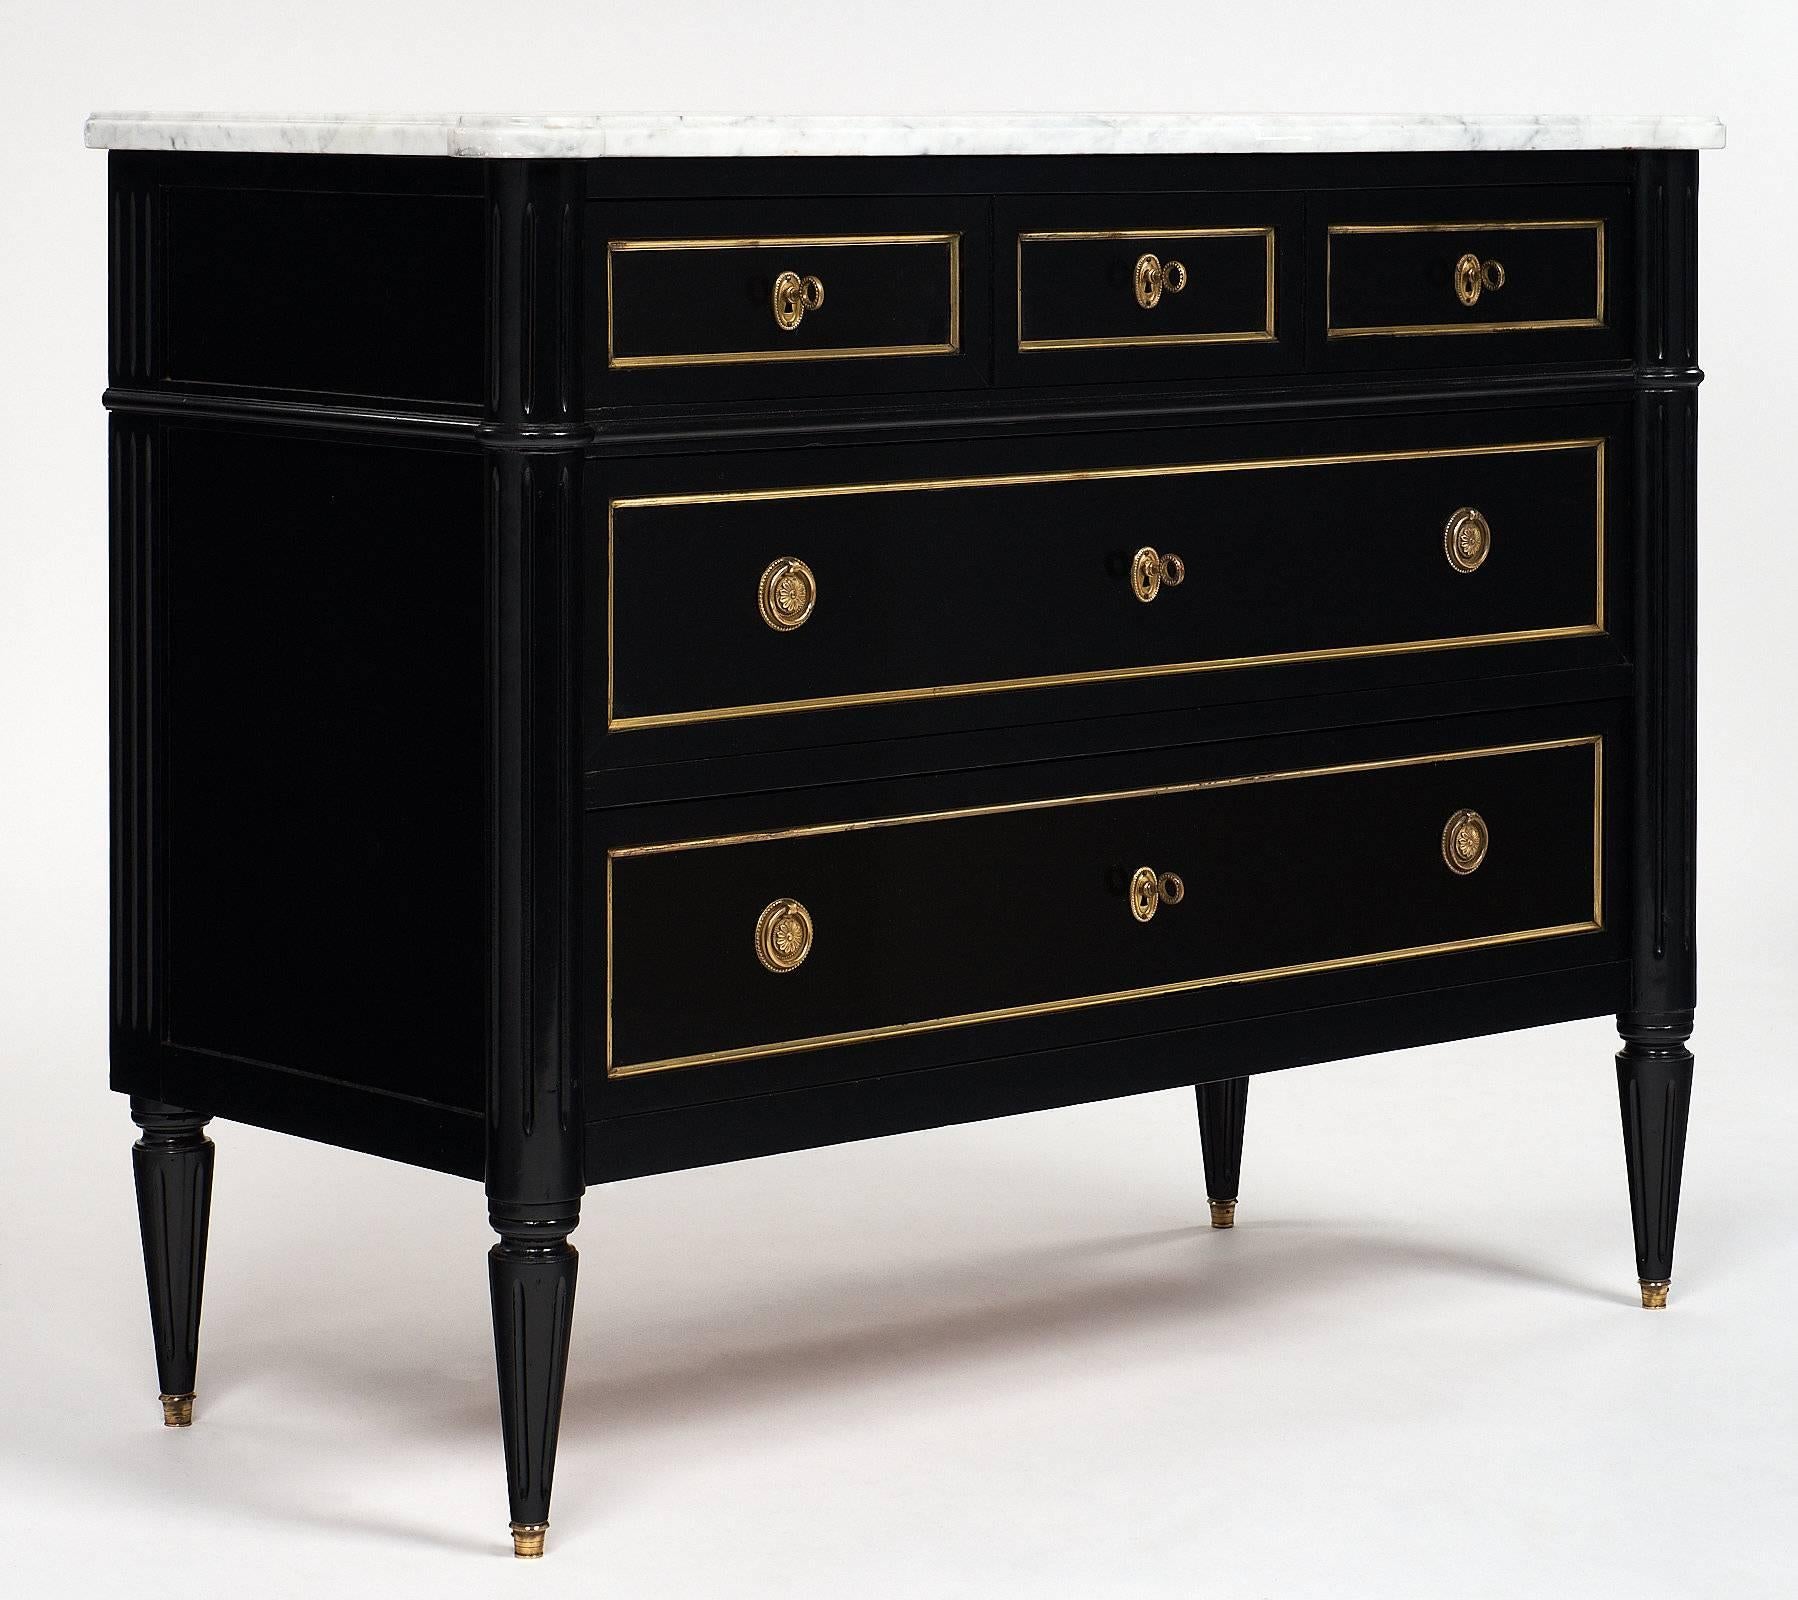 French Louis XVI chest of drawers of mahogany, ebonized and finished with a lustrous French polish, Carrara marble-top, and tapered legs capped with brass feet. The piece has three dovetailed drawers enhanced by gilt brass trims and finely cast